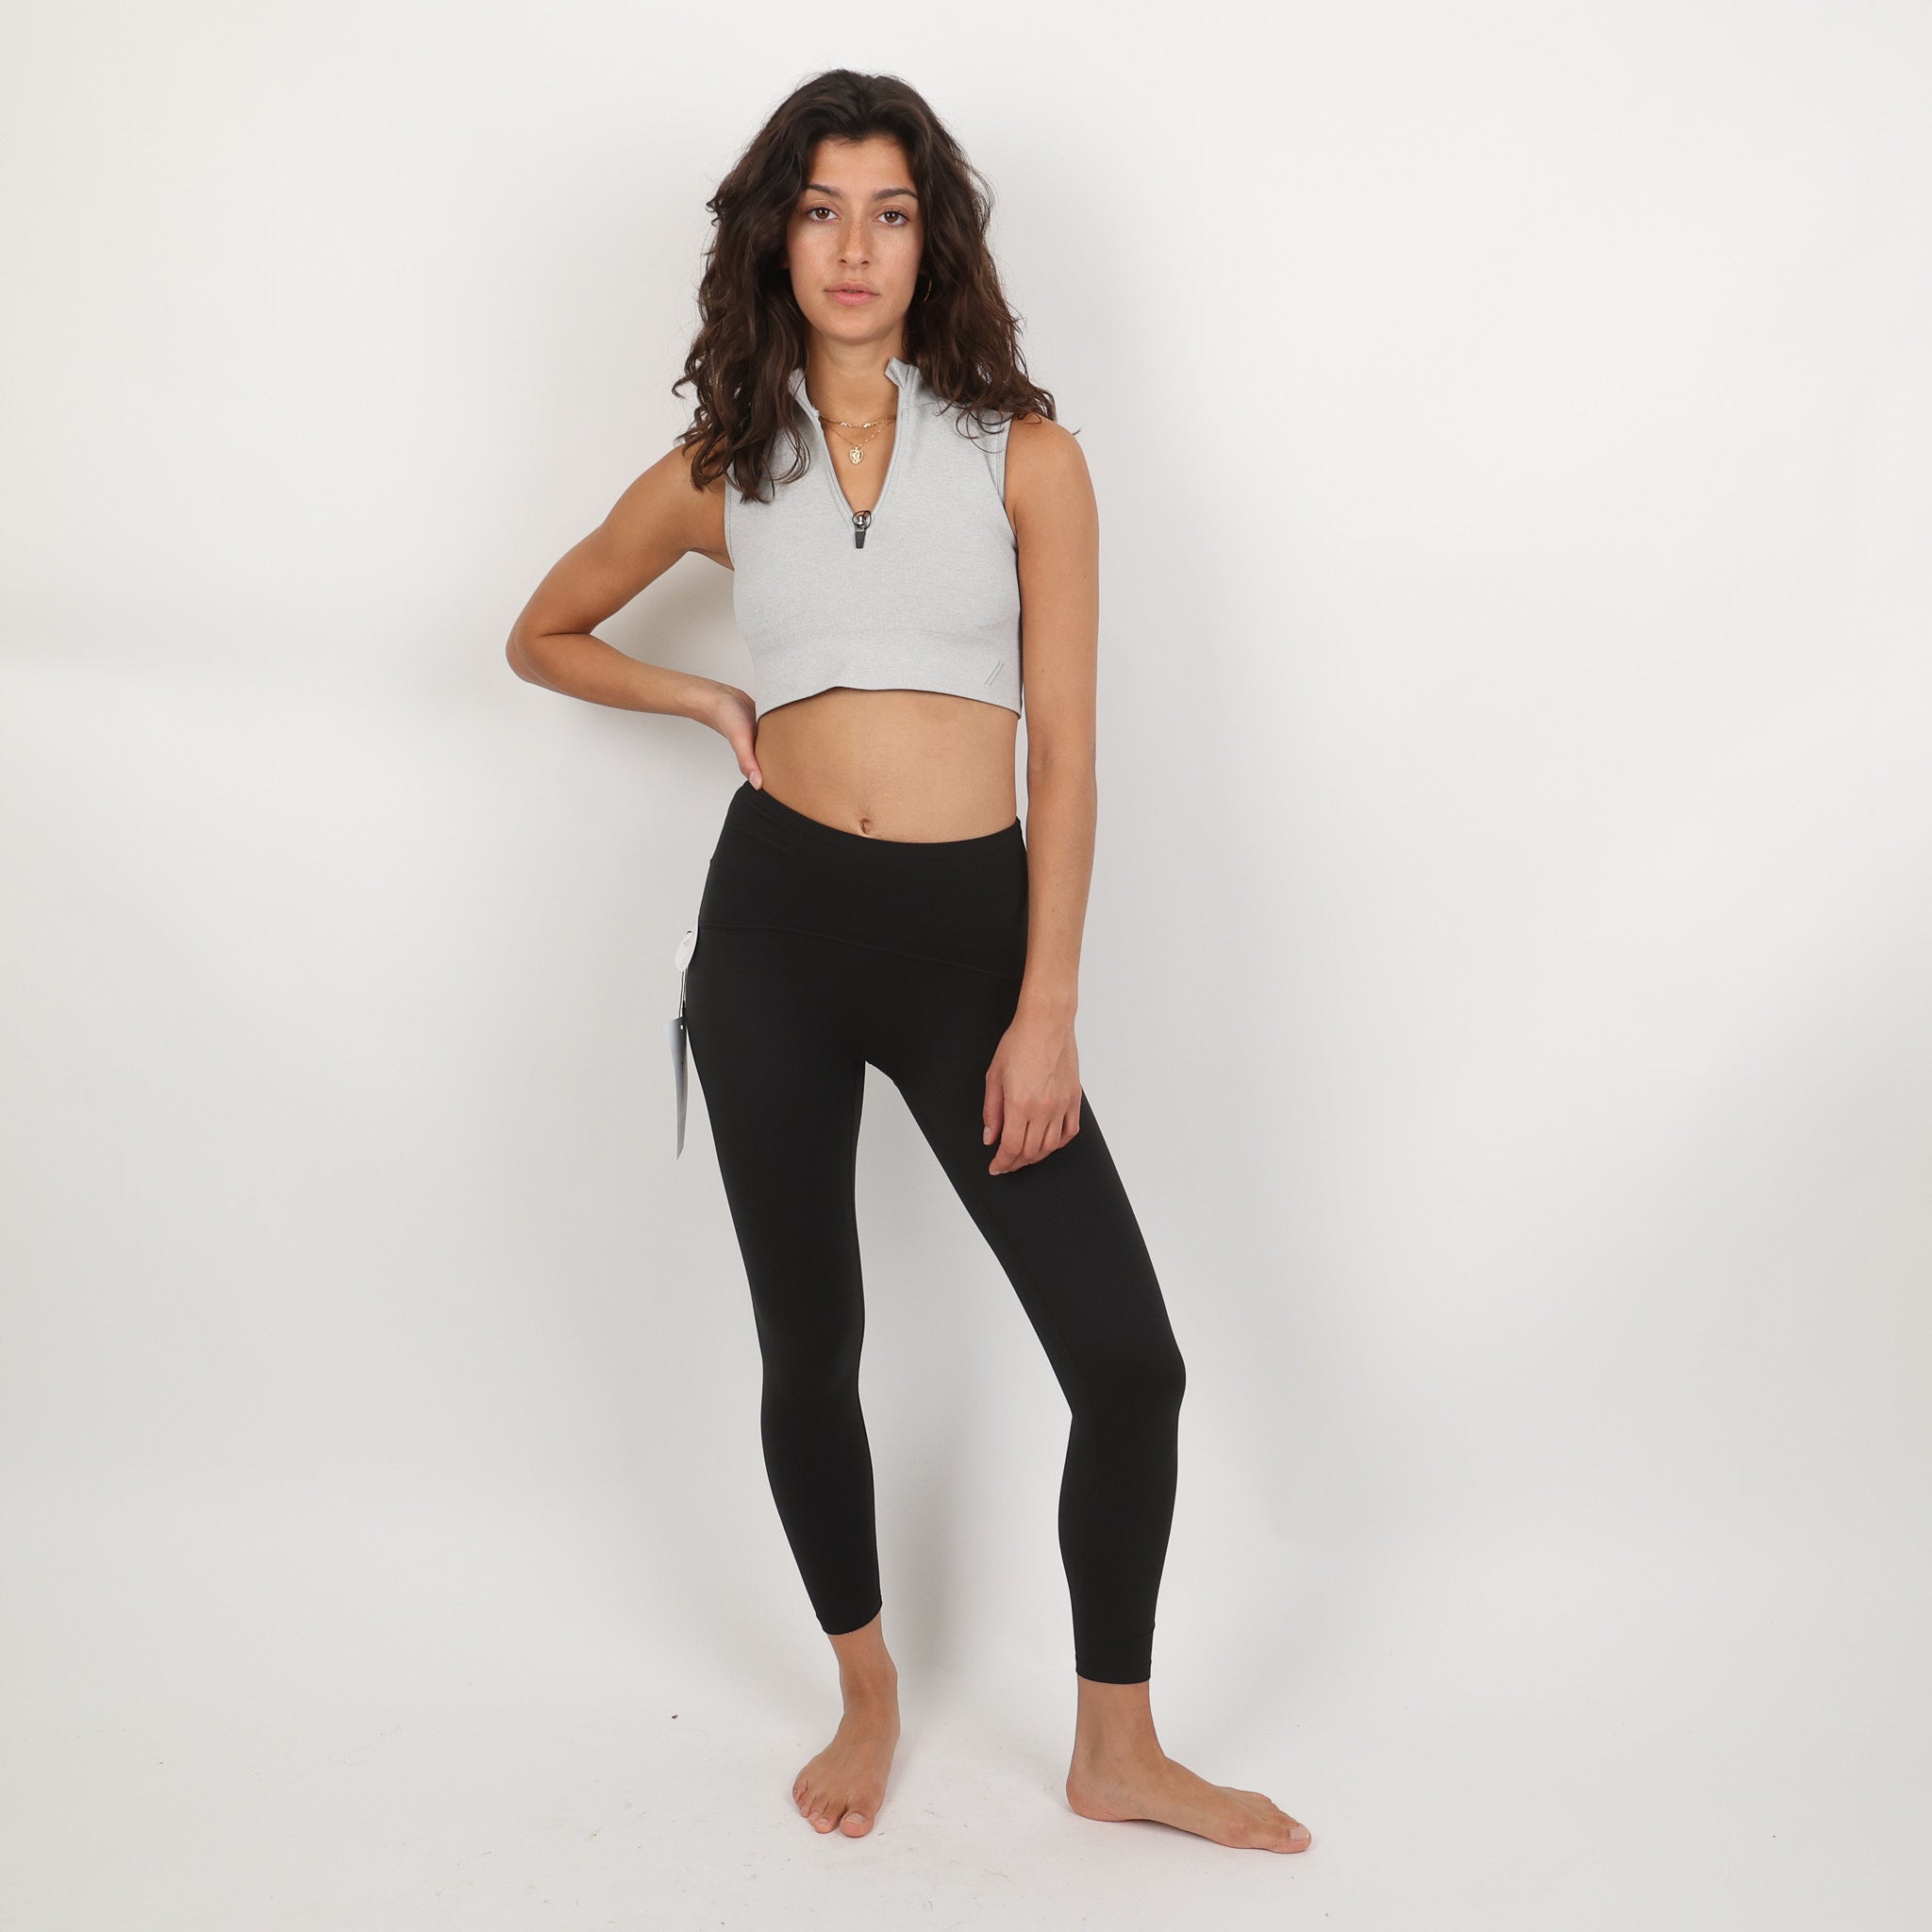 Booty Boost Active high-rise stretch leggings